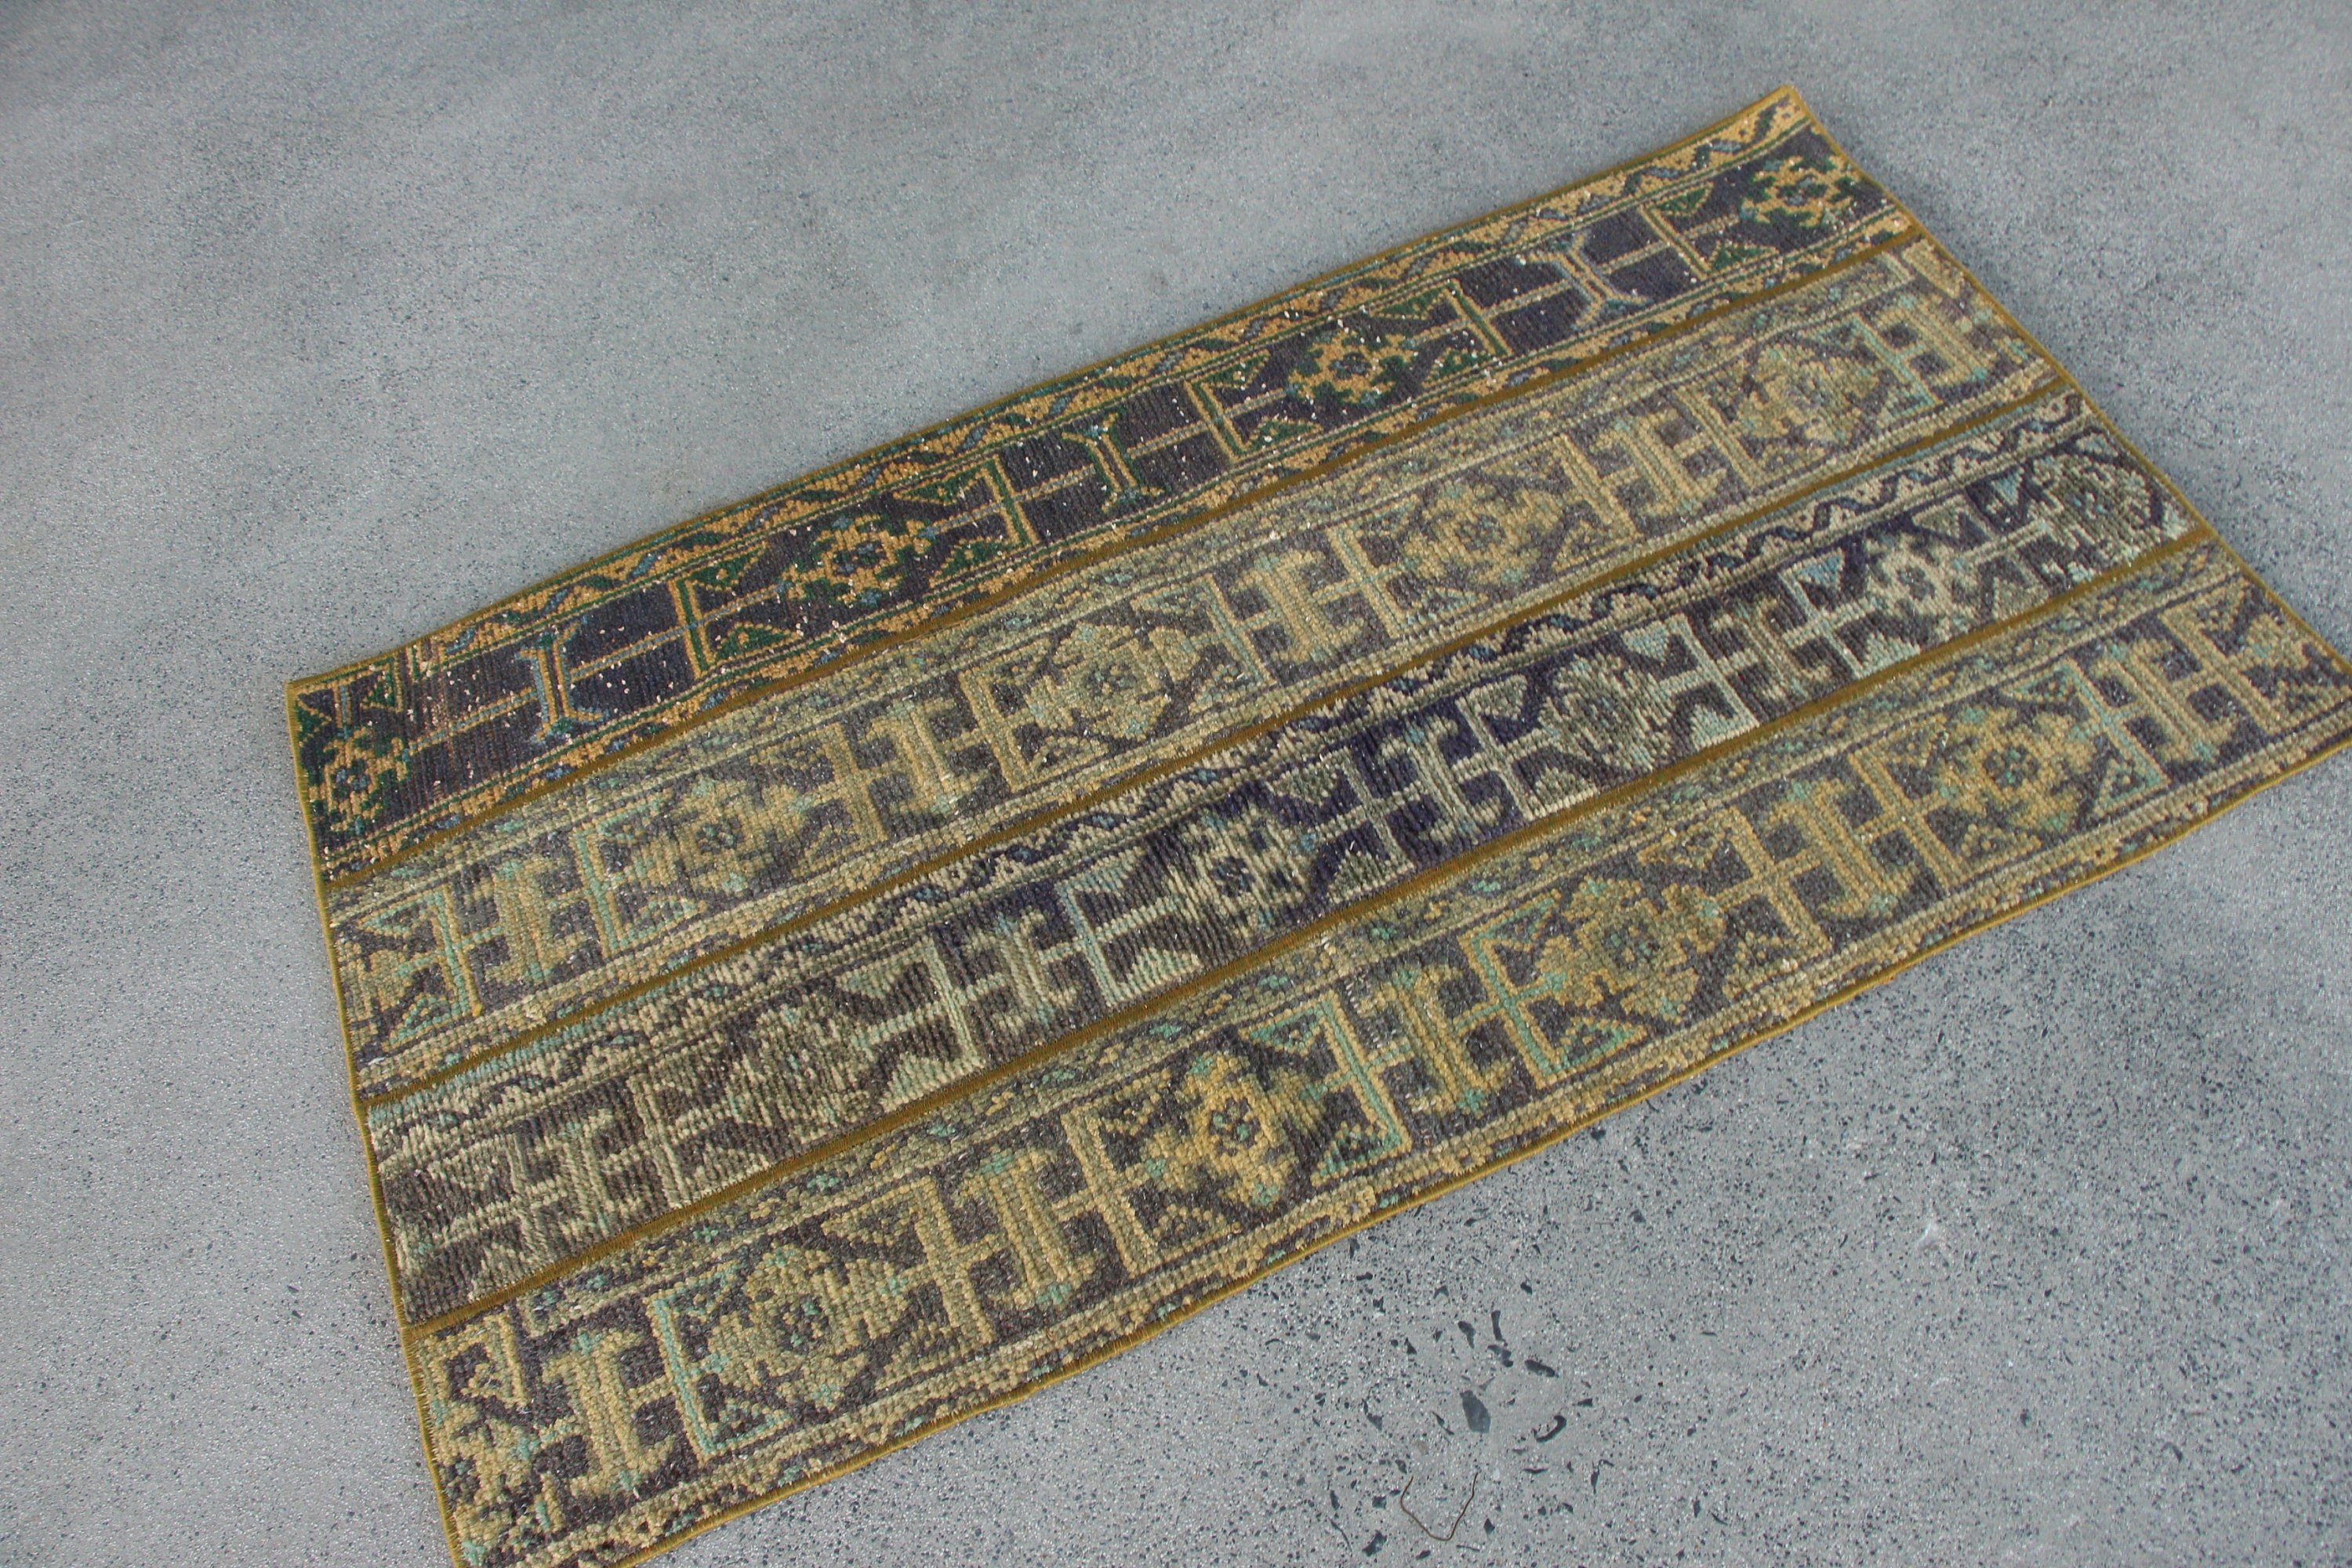 Vintage Rugs, Kitchen Rug, 2.7x4.9 ft Small Rug, Rugs for Door Mat, Blue Moroccan Rug, Bedroom Rug, Turkish Rug, Bright Rugs, Antique Rugs